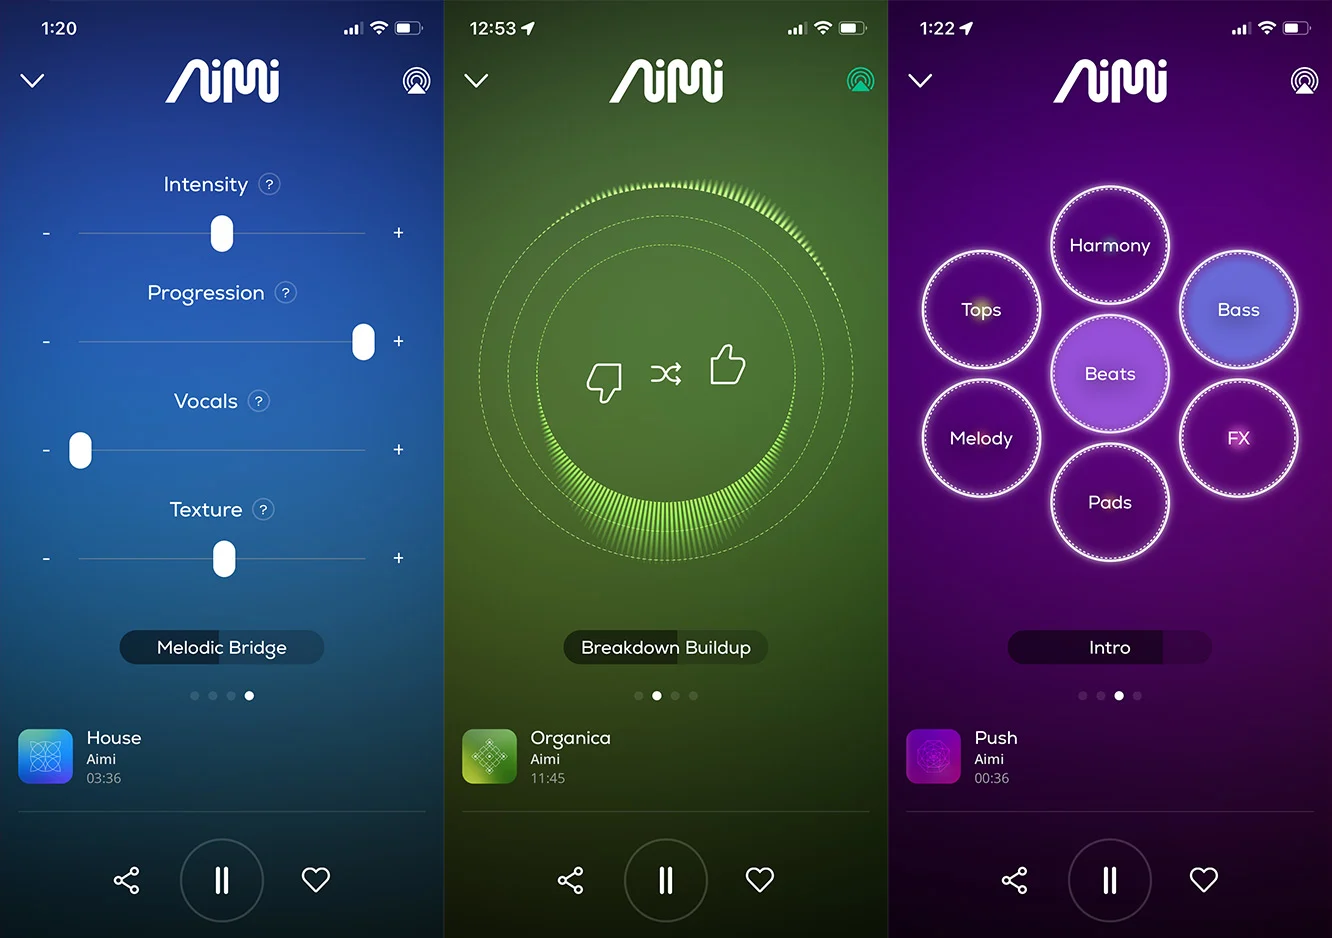 Three screenshots of the Aimi music app side by side.